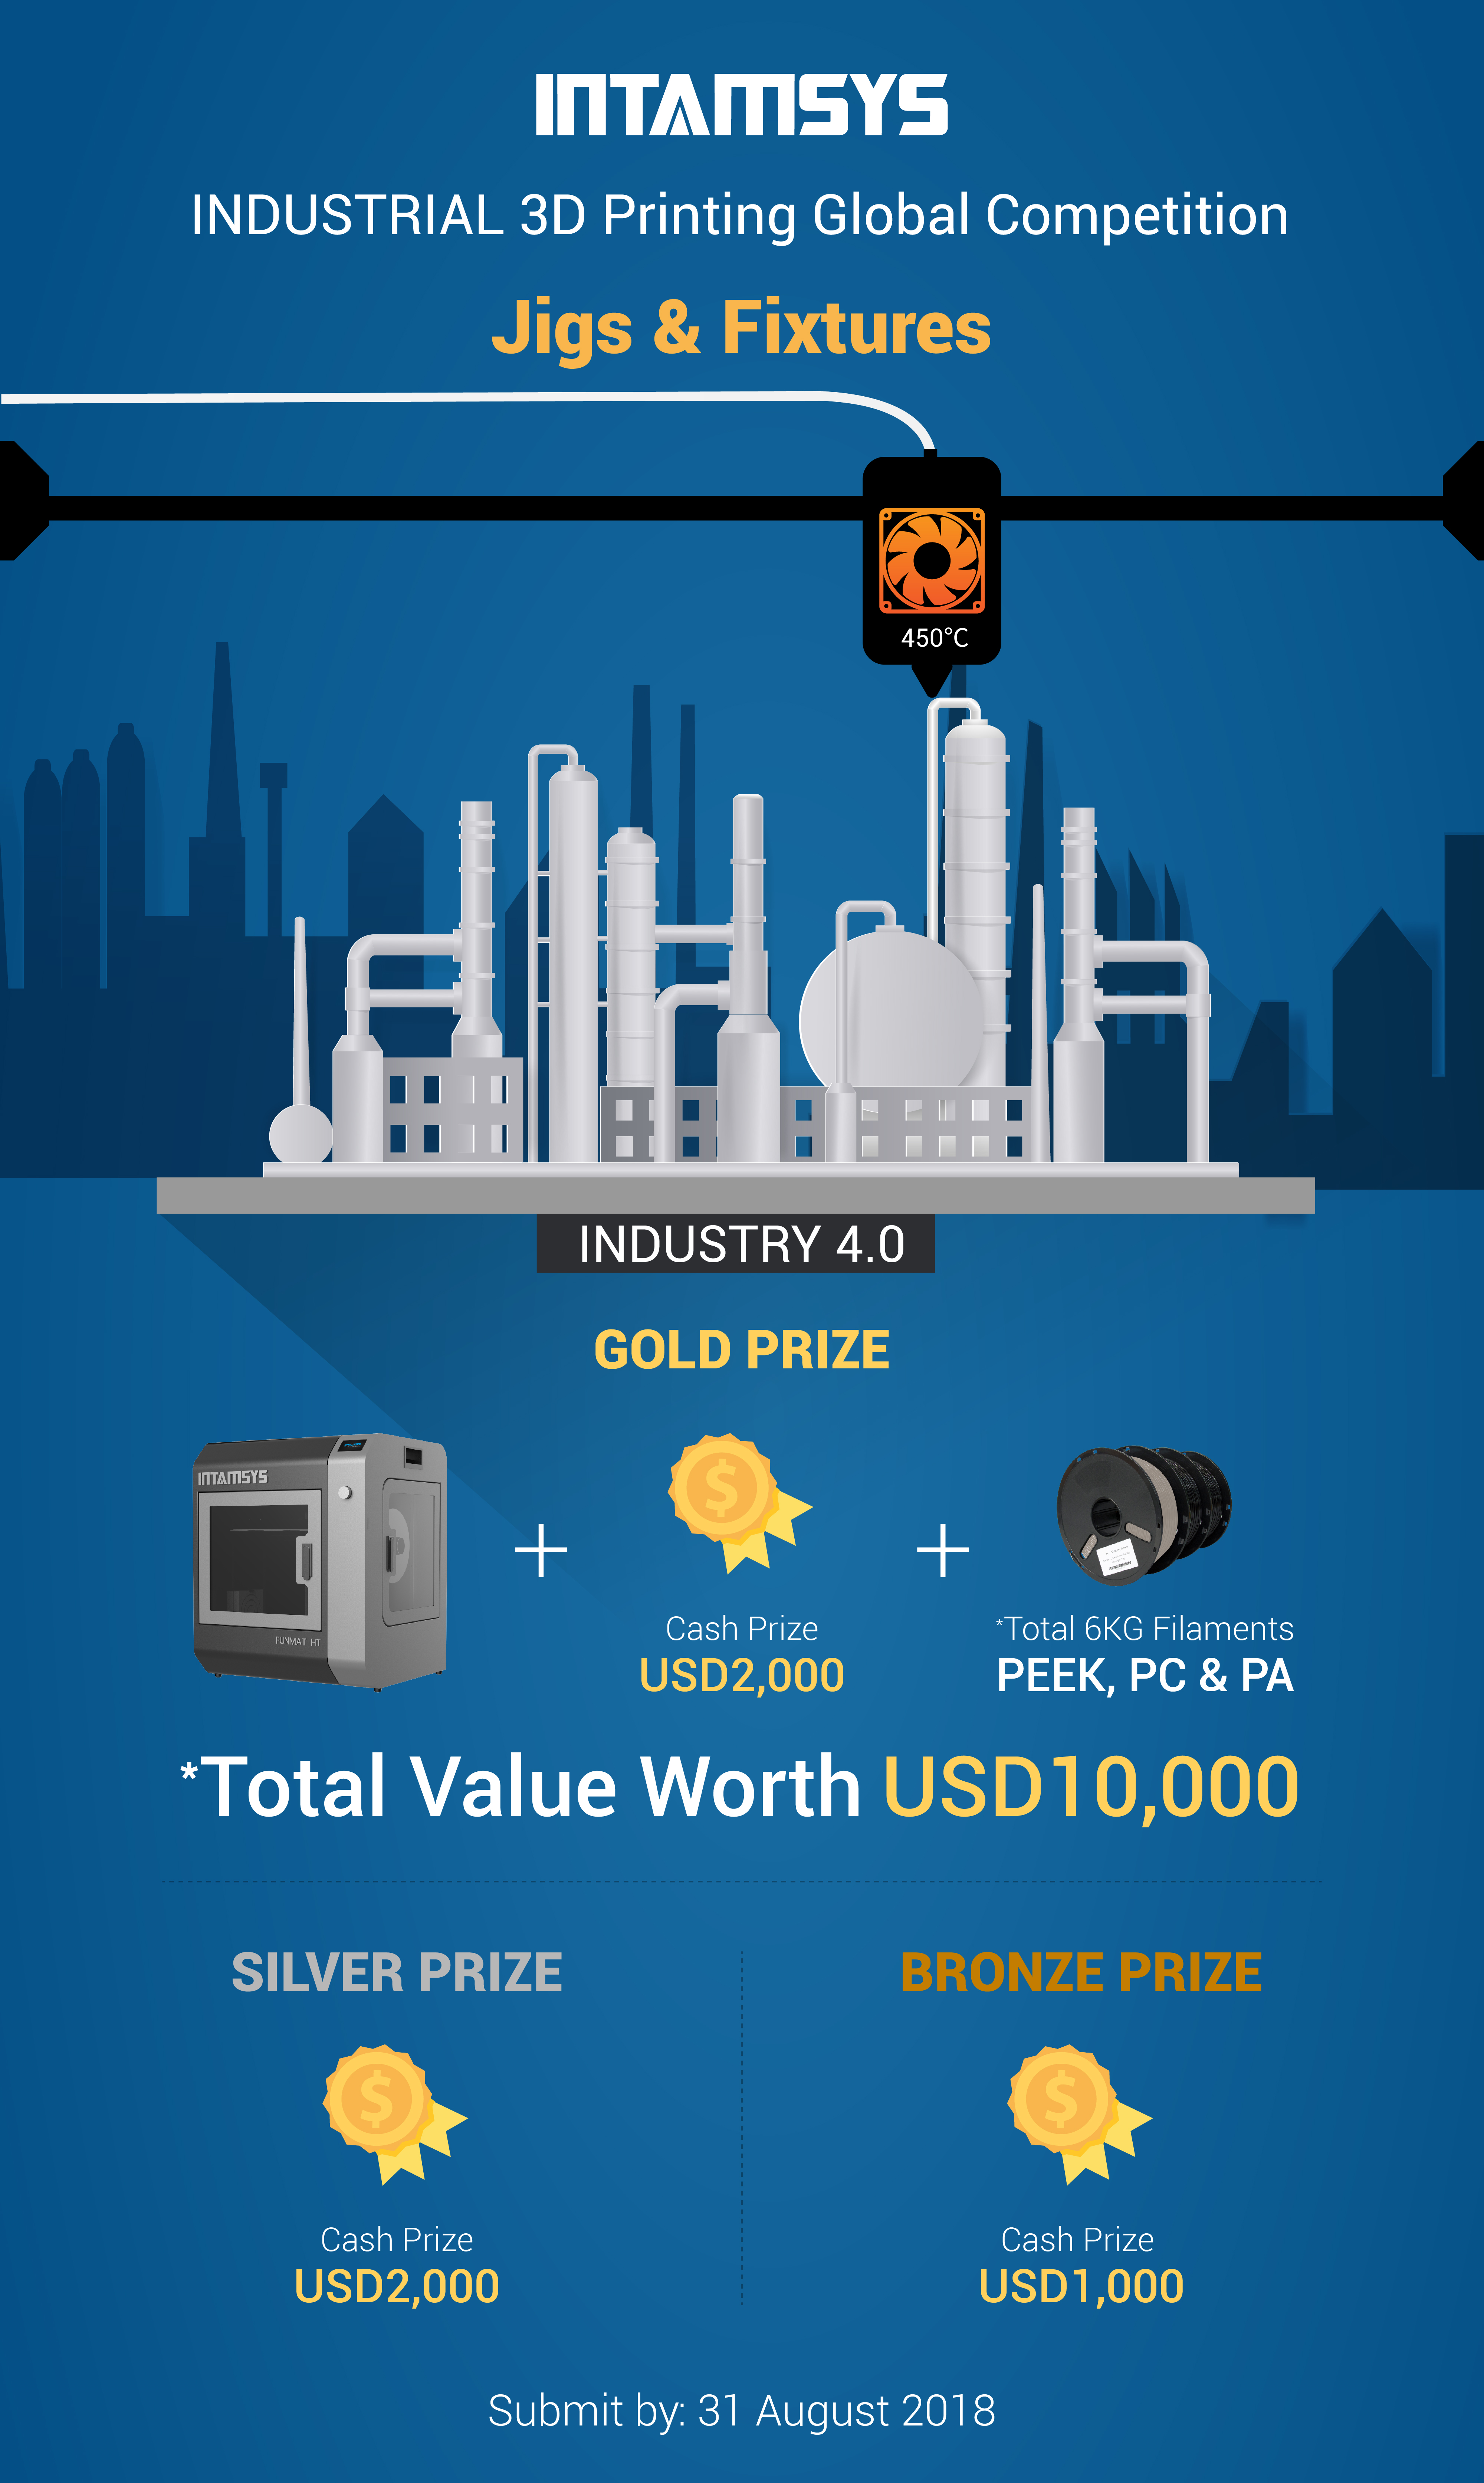 INTAMSYS Industrial 3D Printing Global Competition